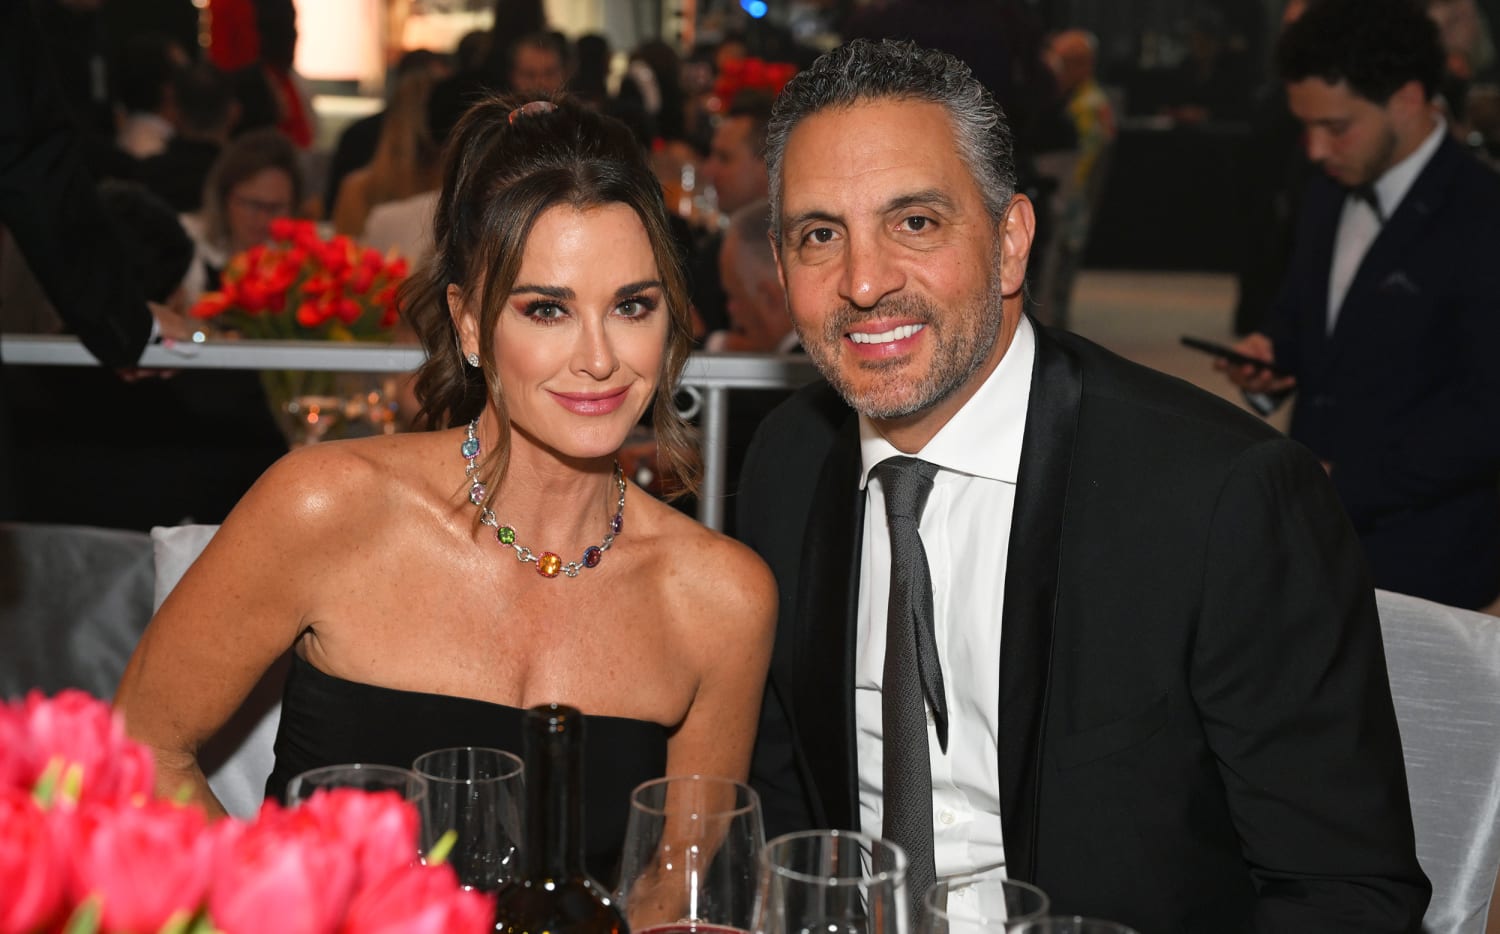 Report: Mauricio Umansky Purchases Condo, Moves Out of Home Shared with Kyle Richards Amid Split